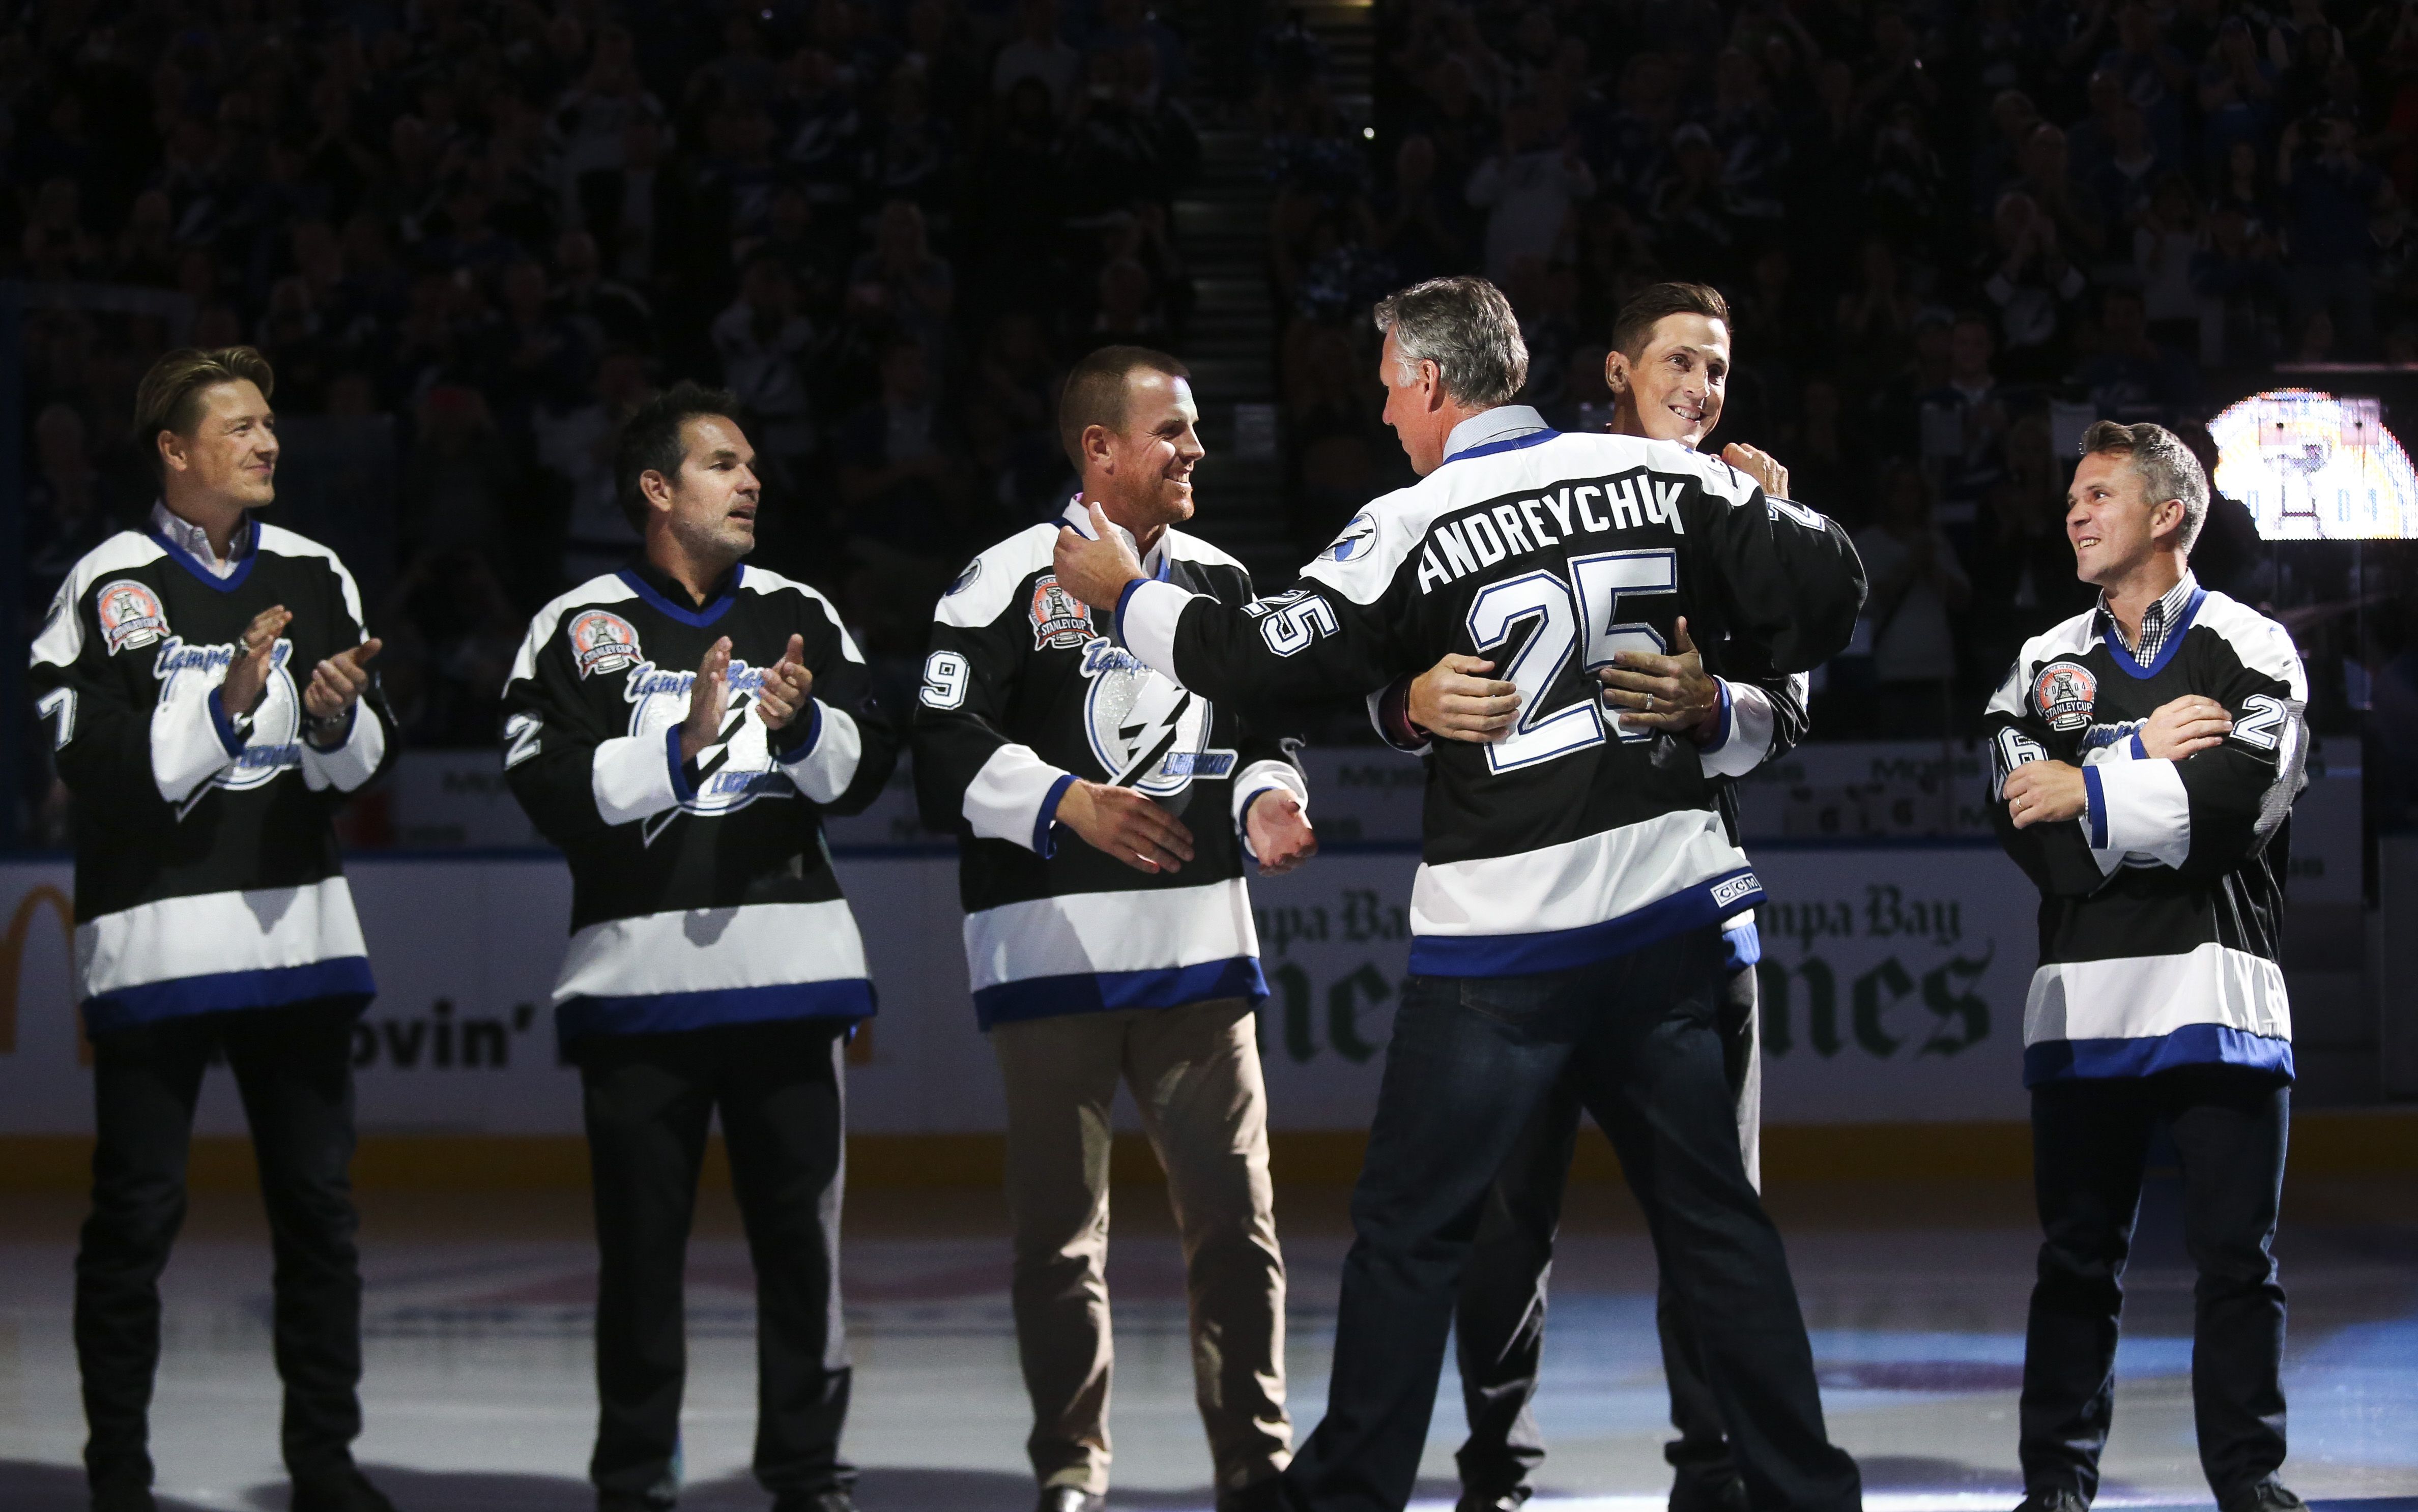 Dave Andreychuk remembers Lightning's Stanley Cup championship season